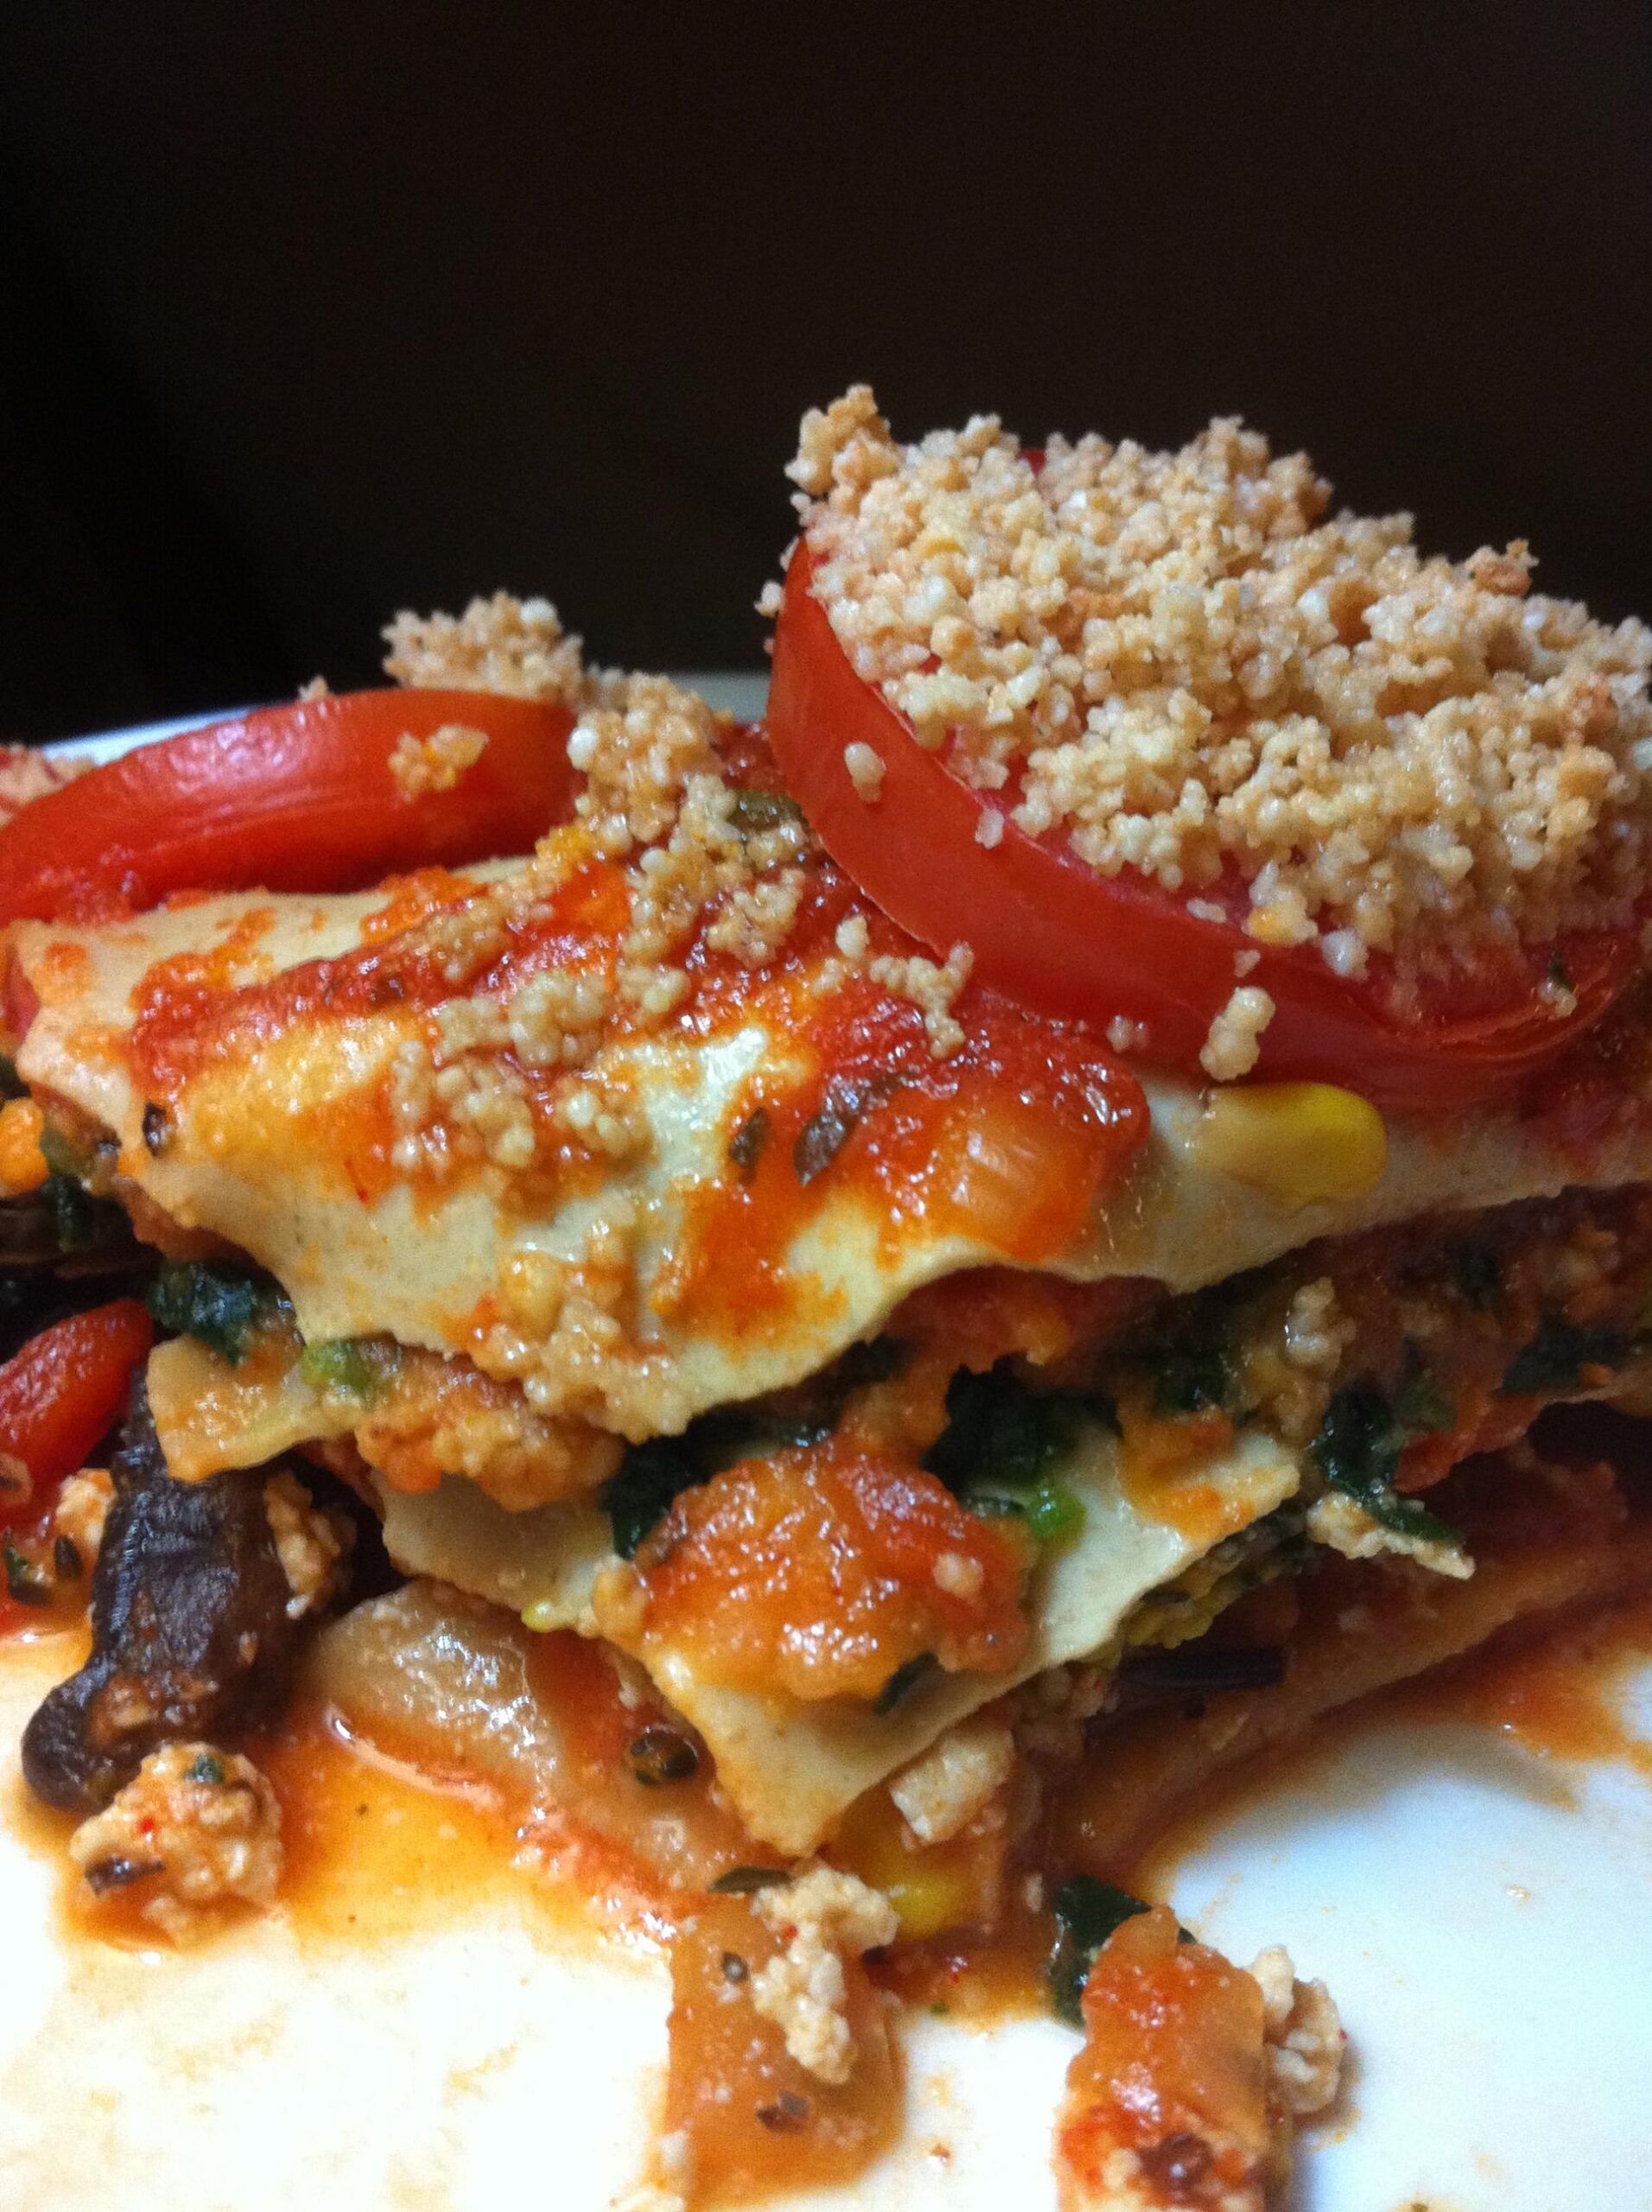  Try something new with a veggie lasagna packed with sweet potato goodness.